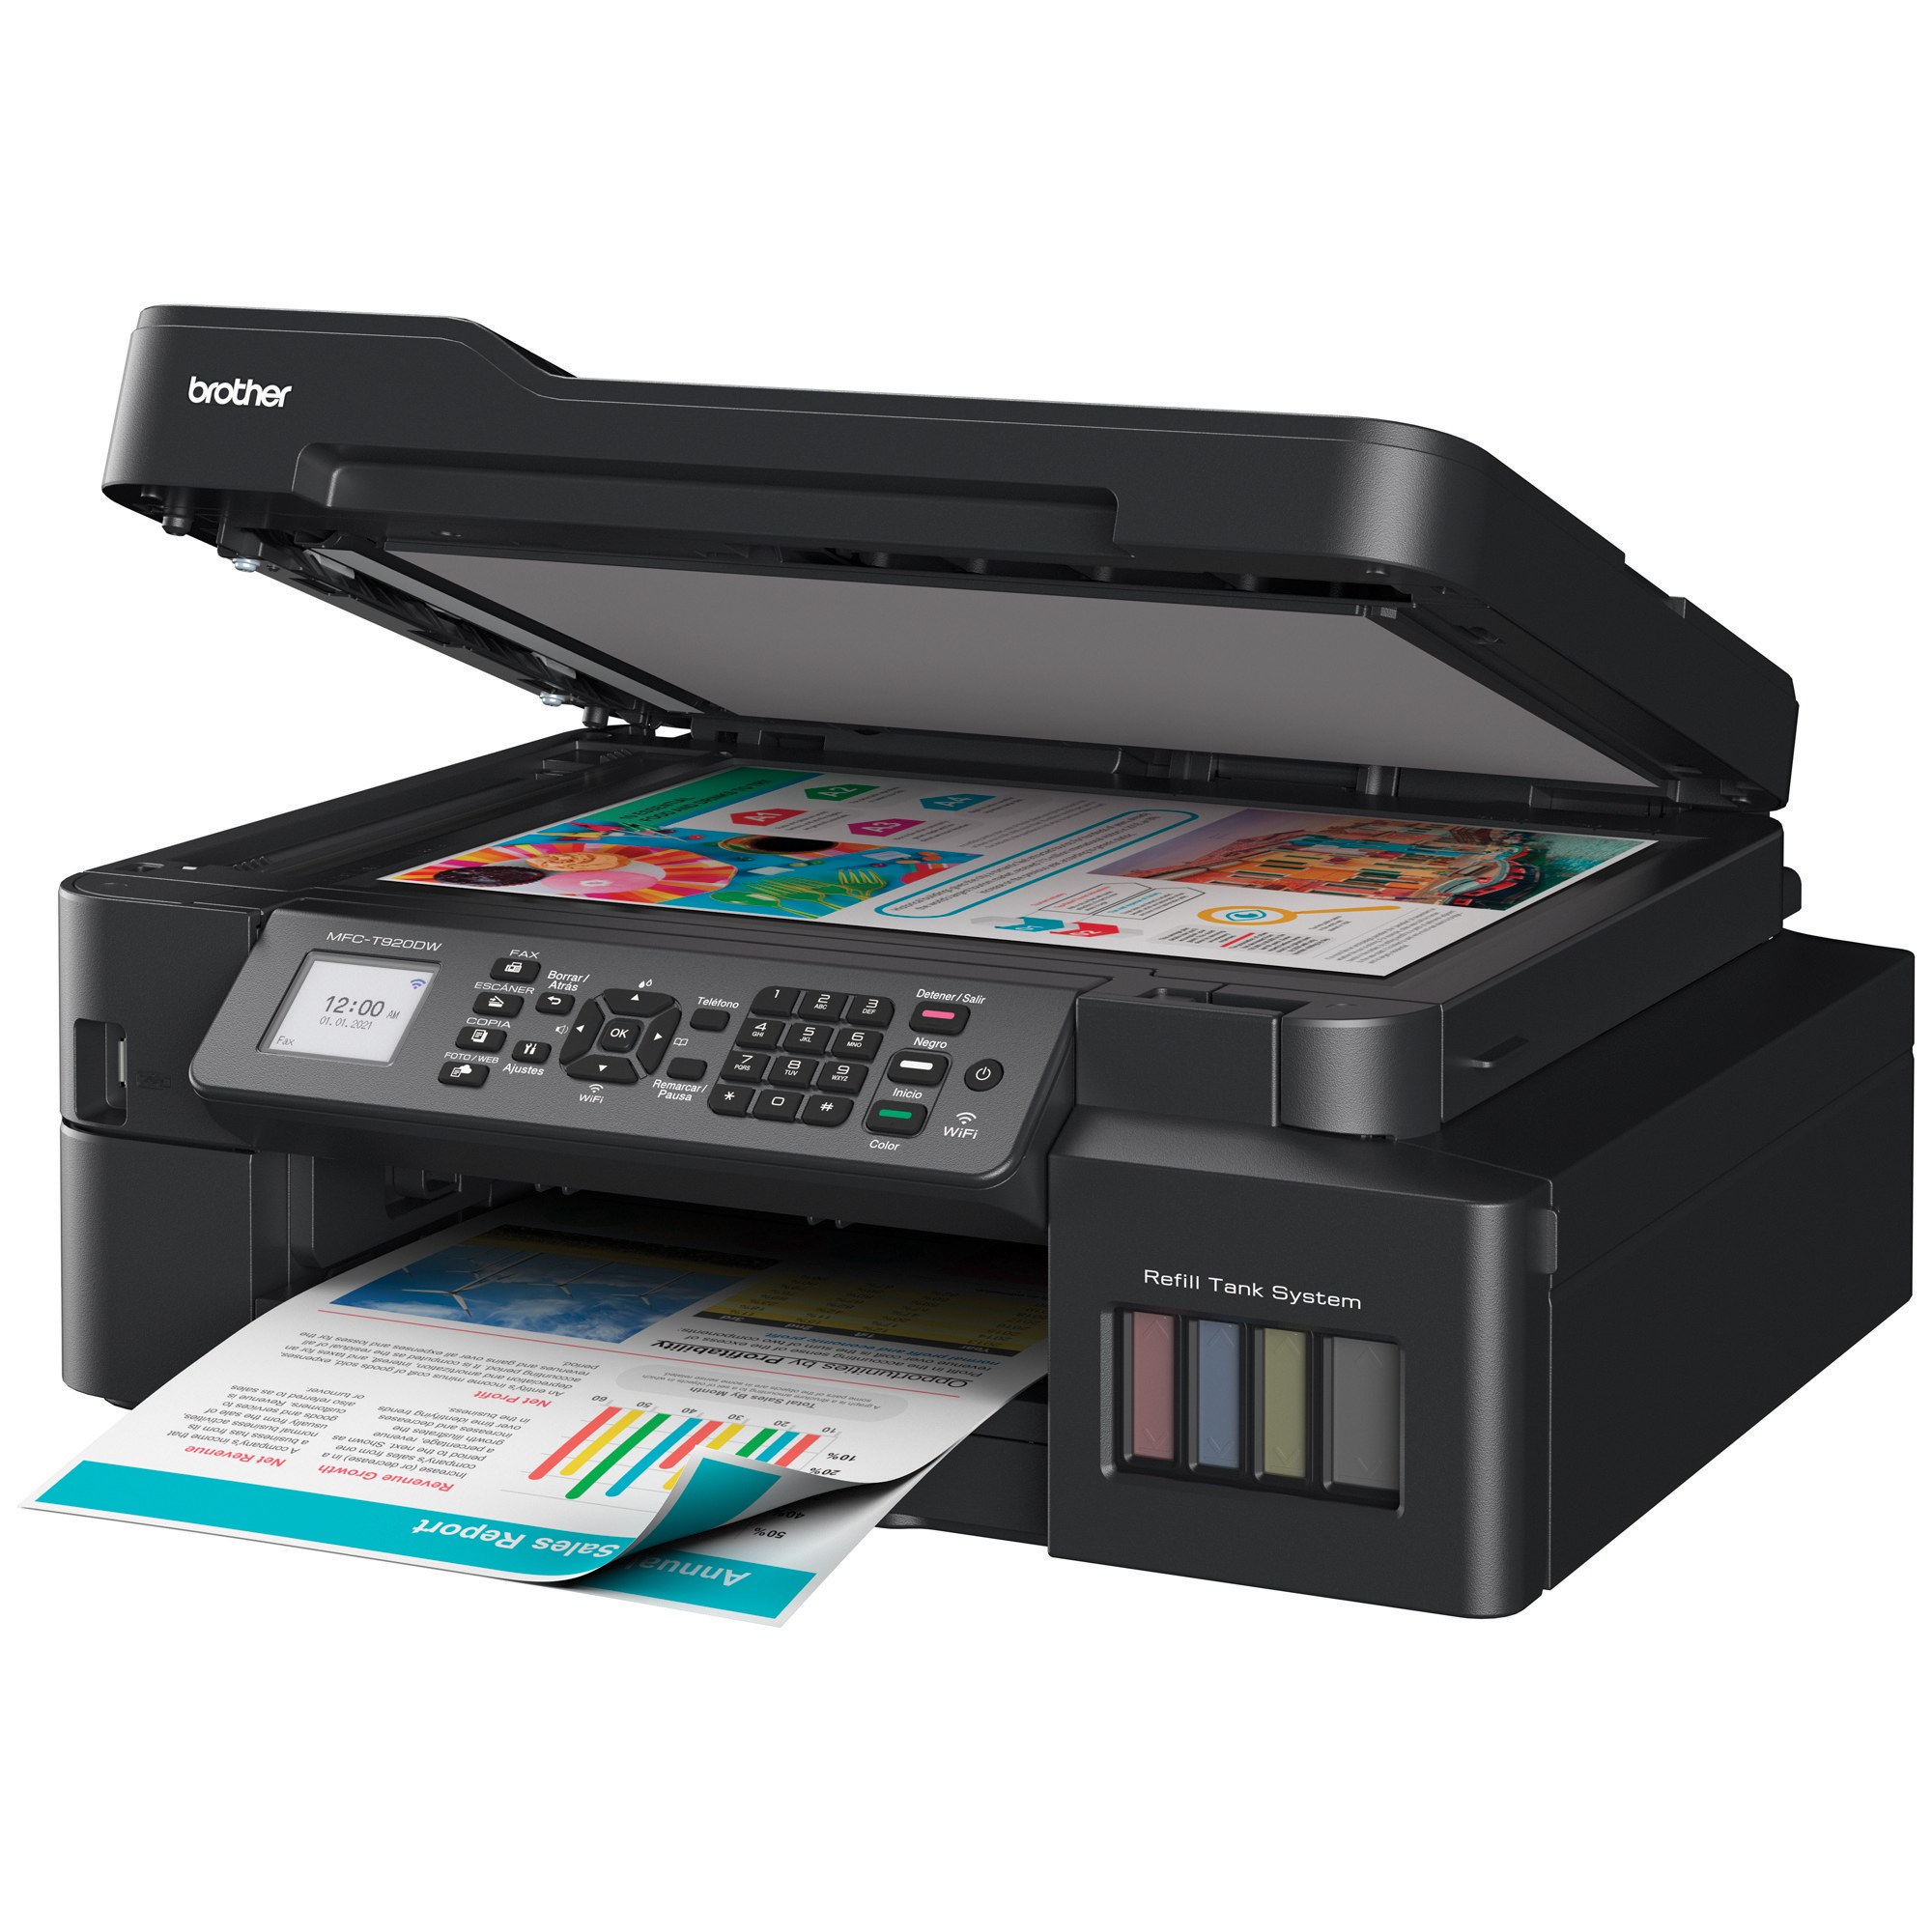 Multifuncional Tinta Continua Brother MFCT920DW - 30 ppm negro/26 ppm color